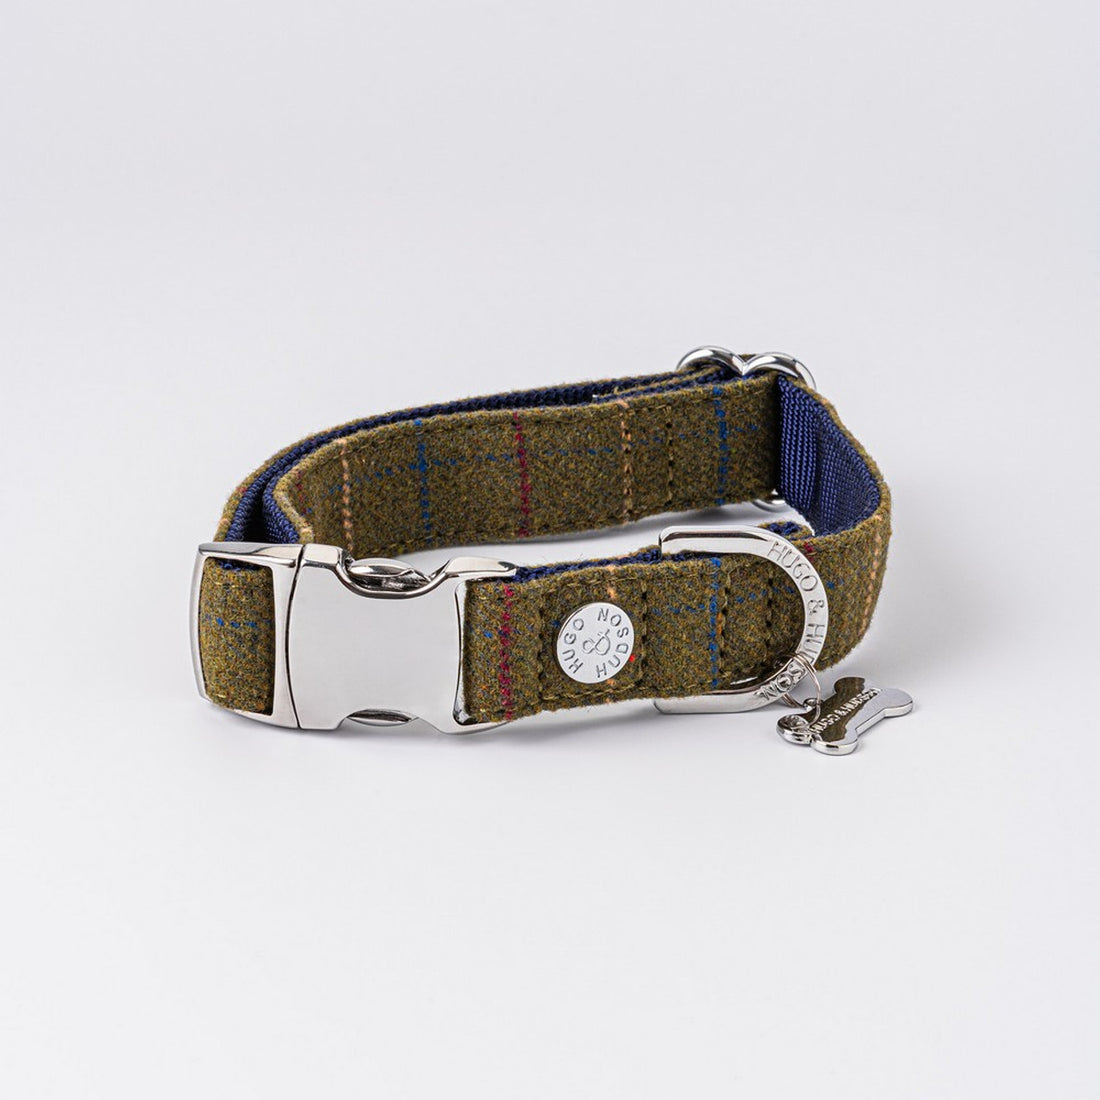 Hugo and Hudson Dark Green Tweed Dog Collar   This beautiful dark green checked tweed collar is from the Hugo and Hudson premium fabric collection.